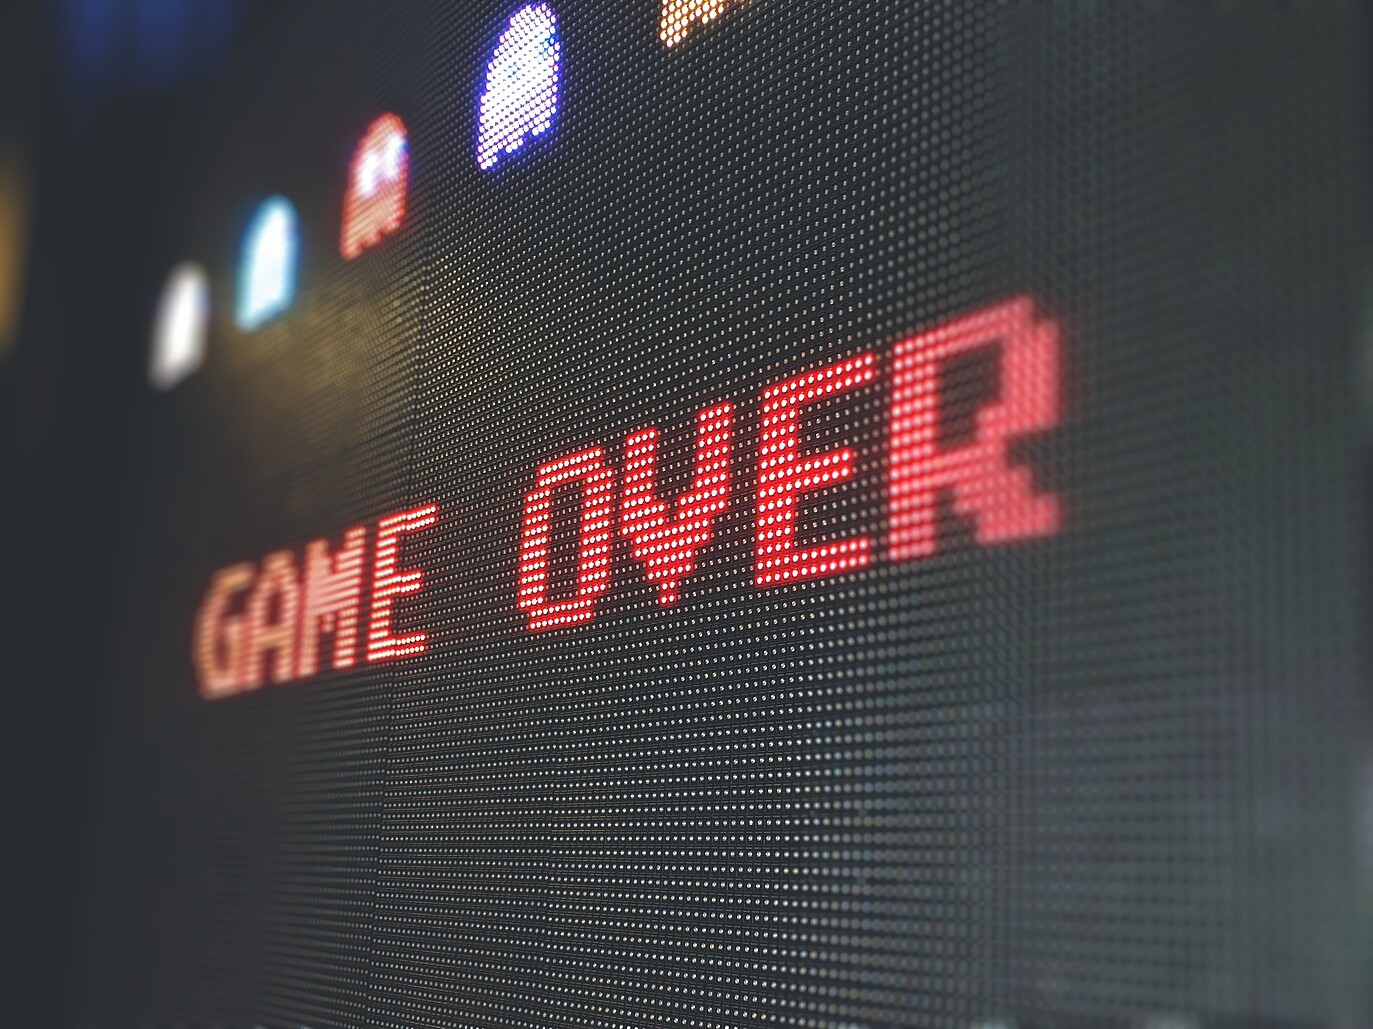 A picture shows a sign that says game over